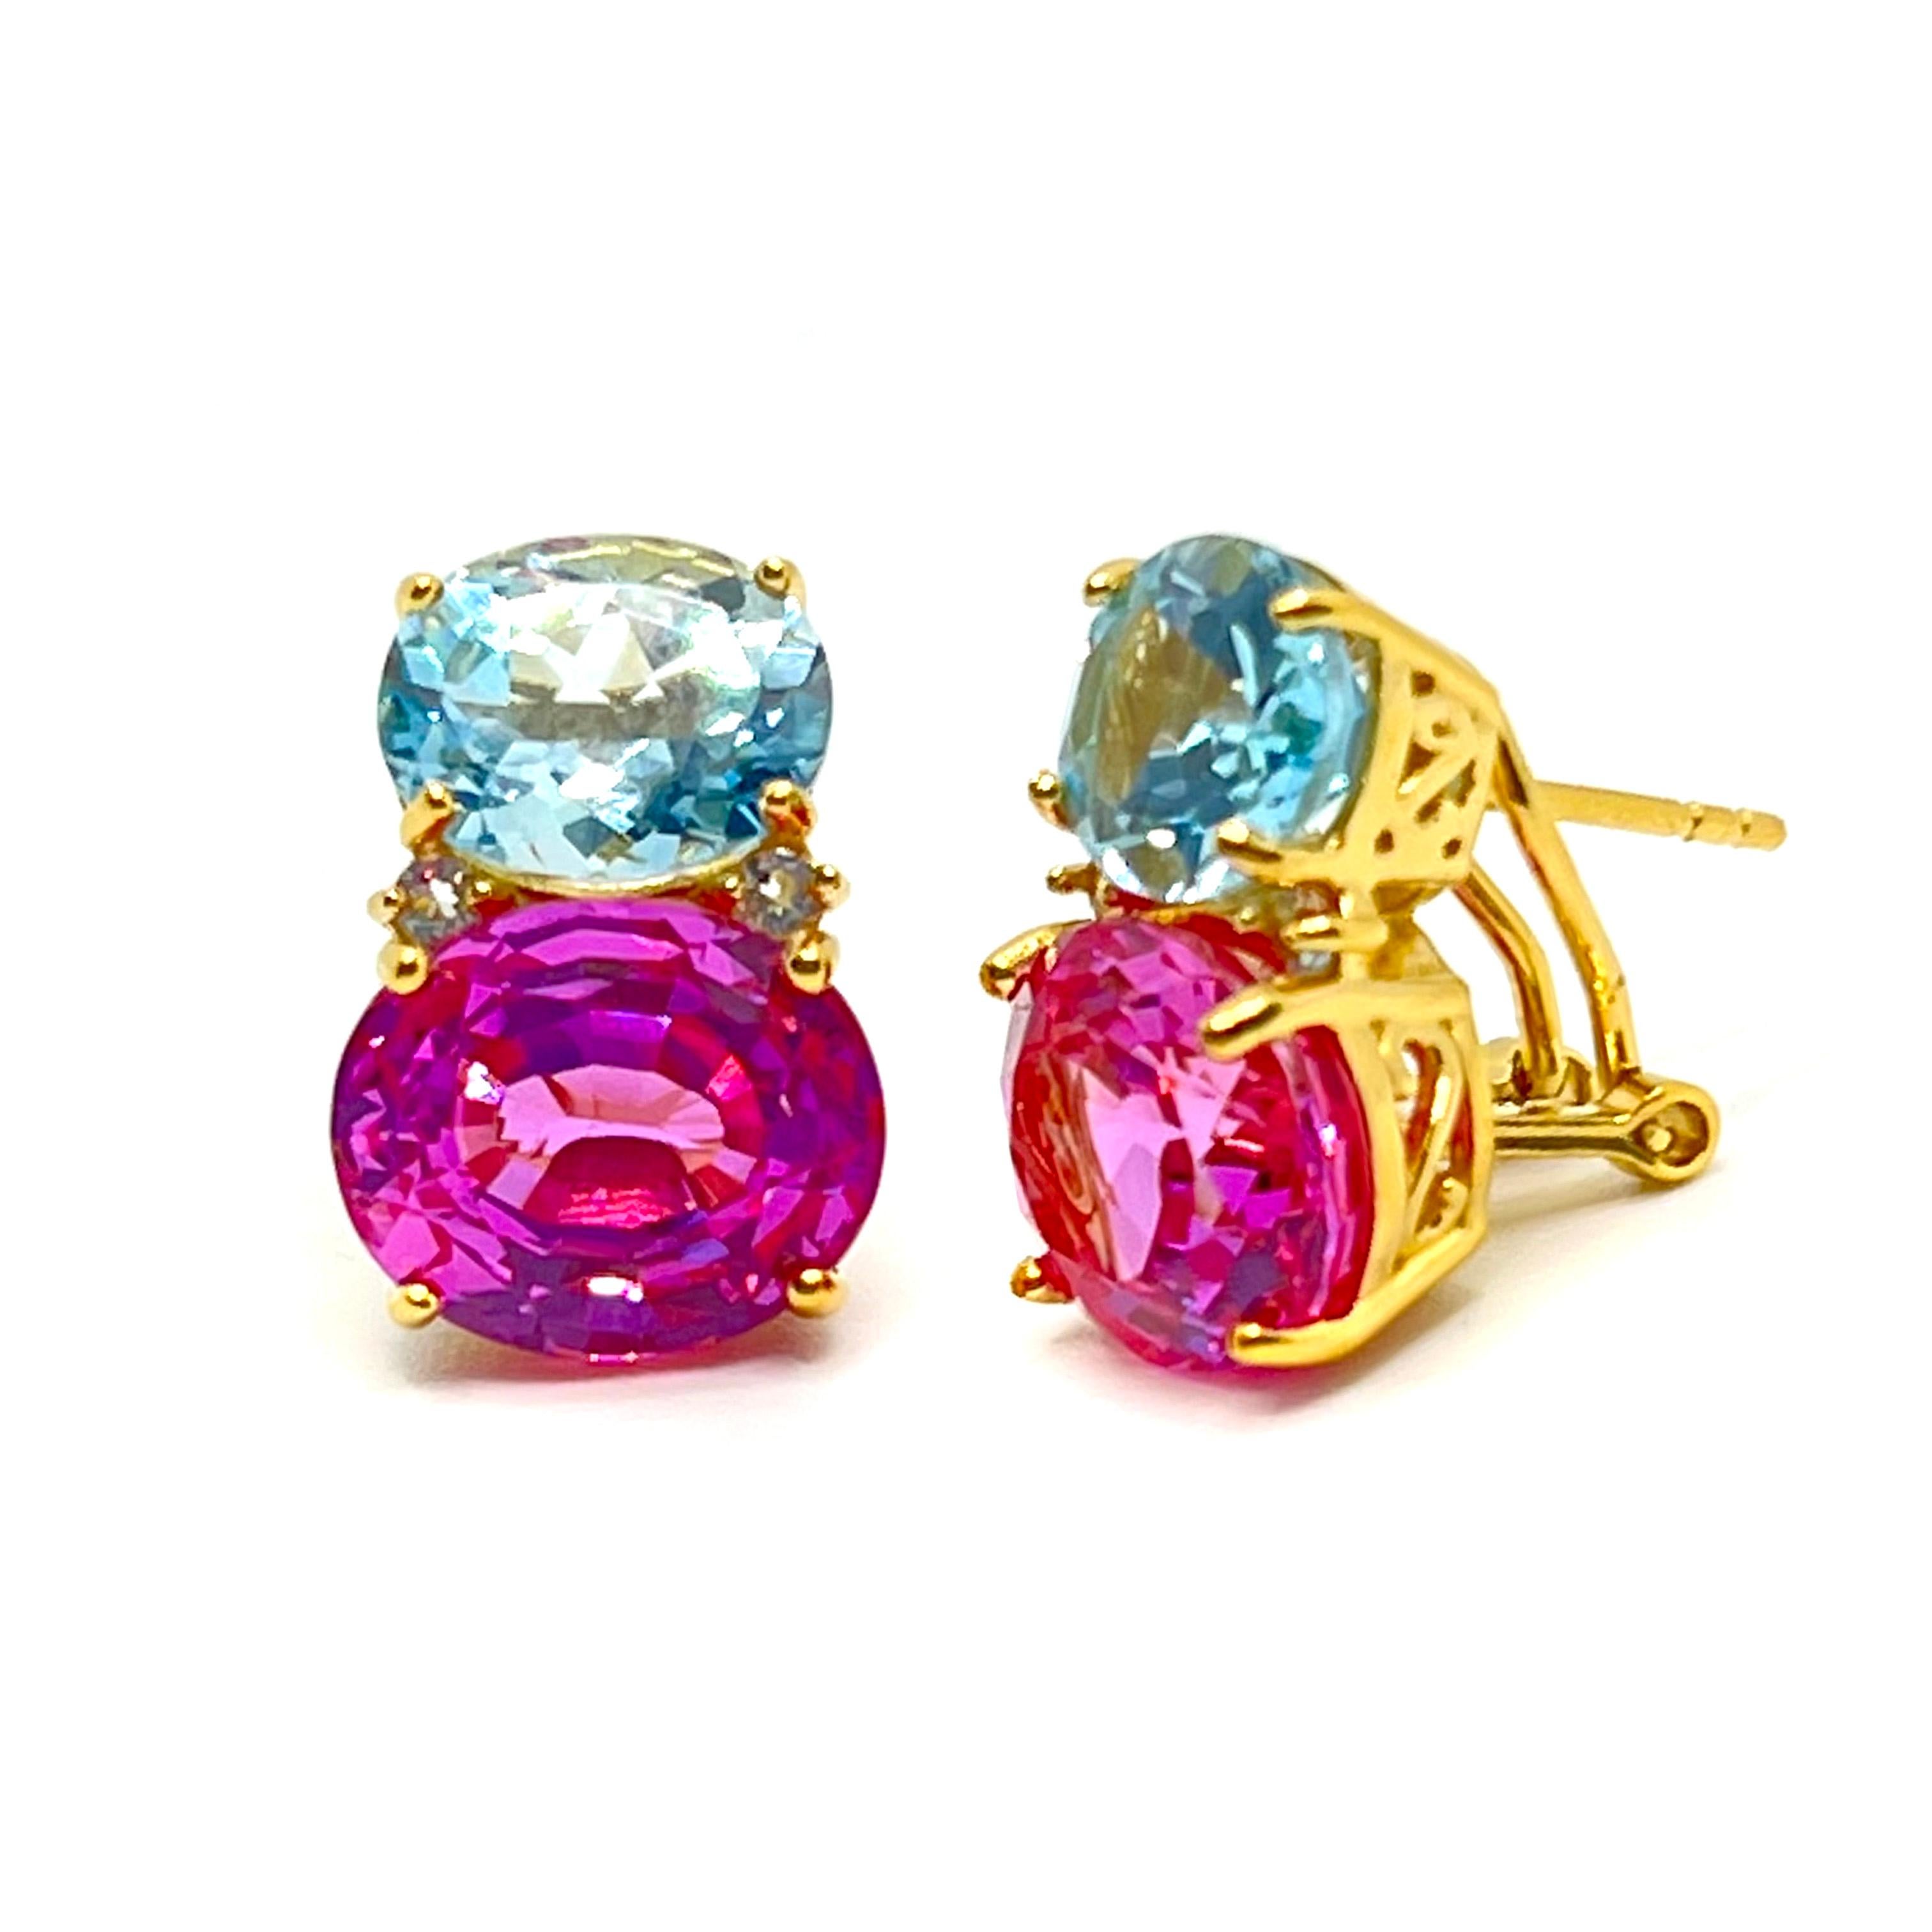 Contemporary Stunning Double Oval Blue Topaz & Pink Sapphire Earrings For Sale